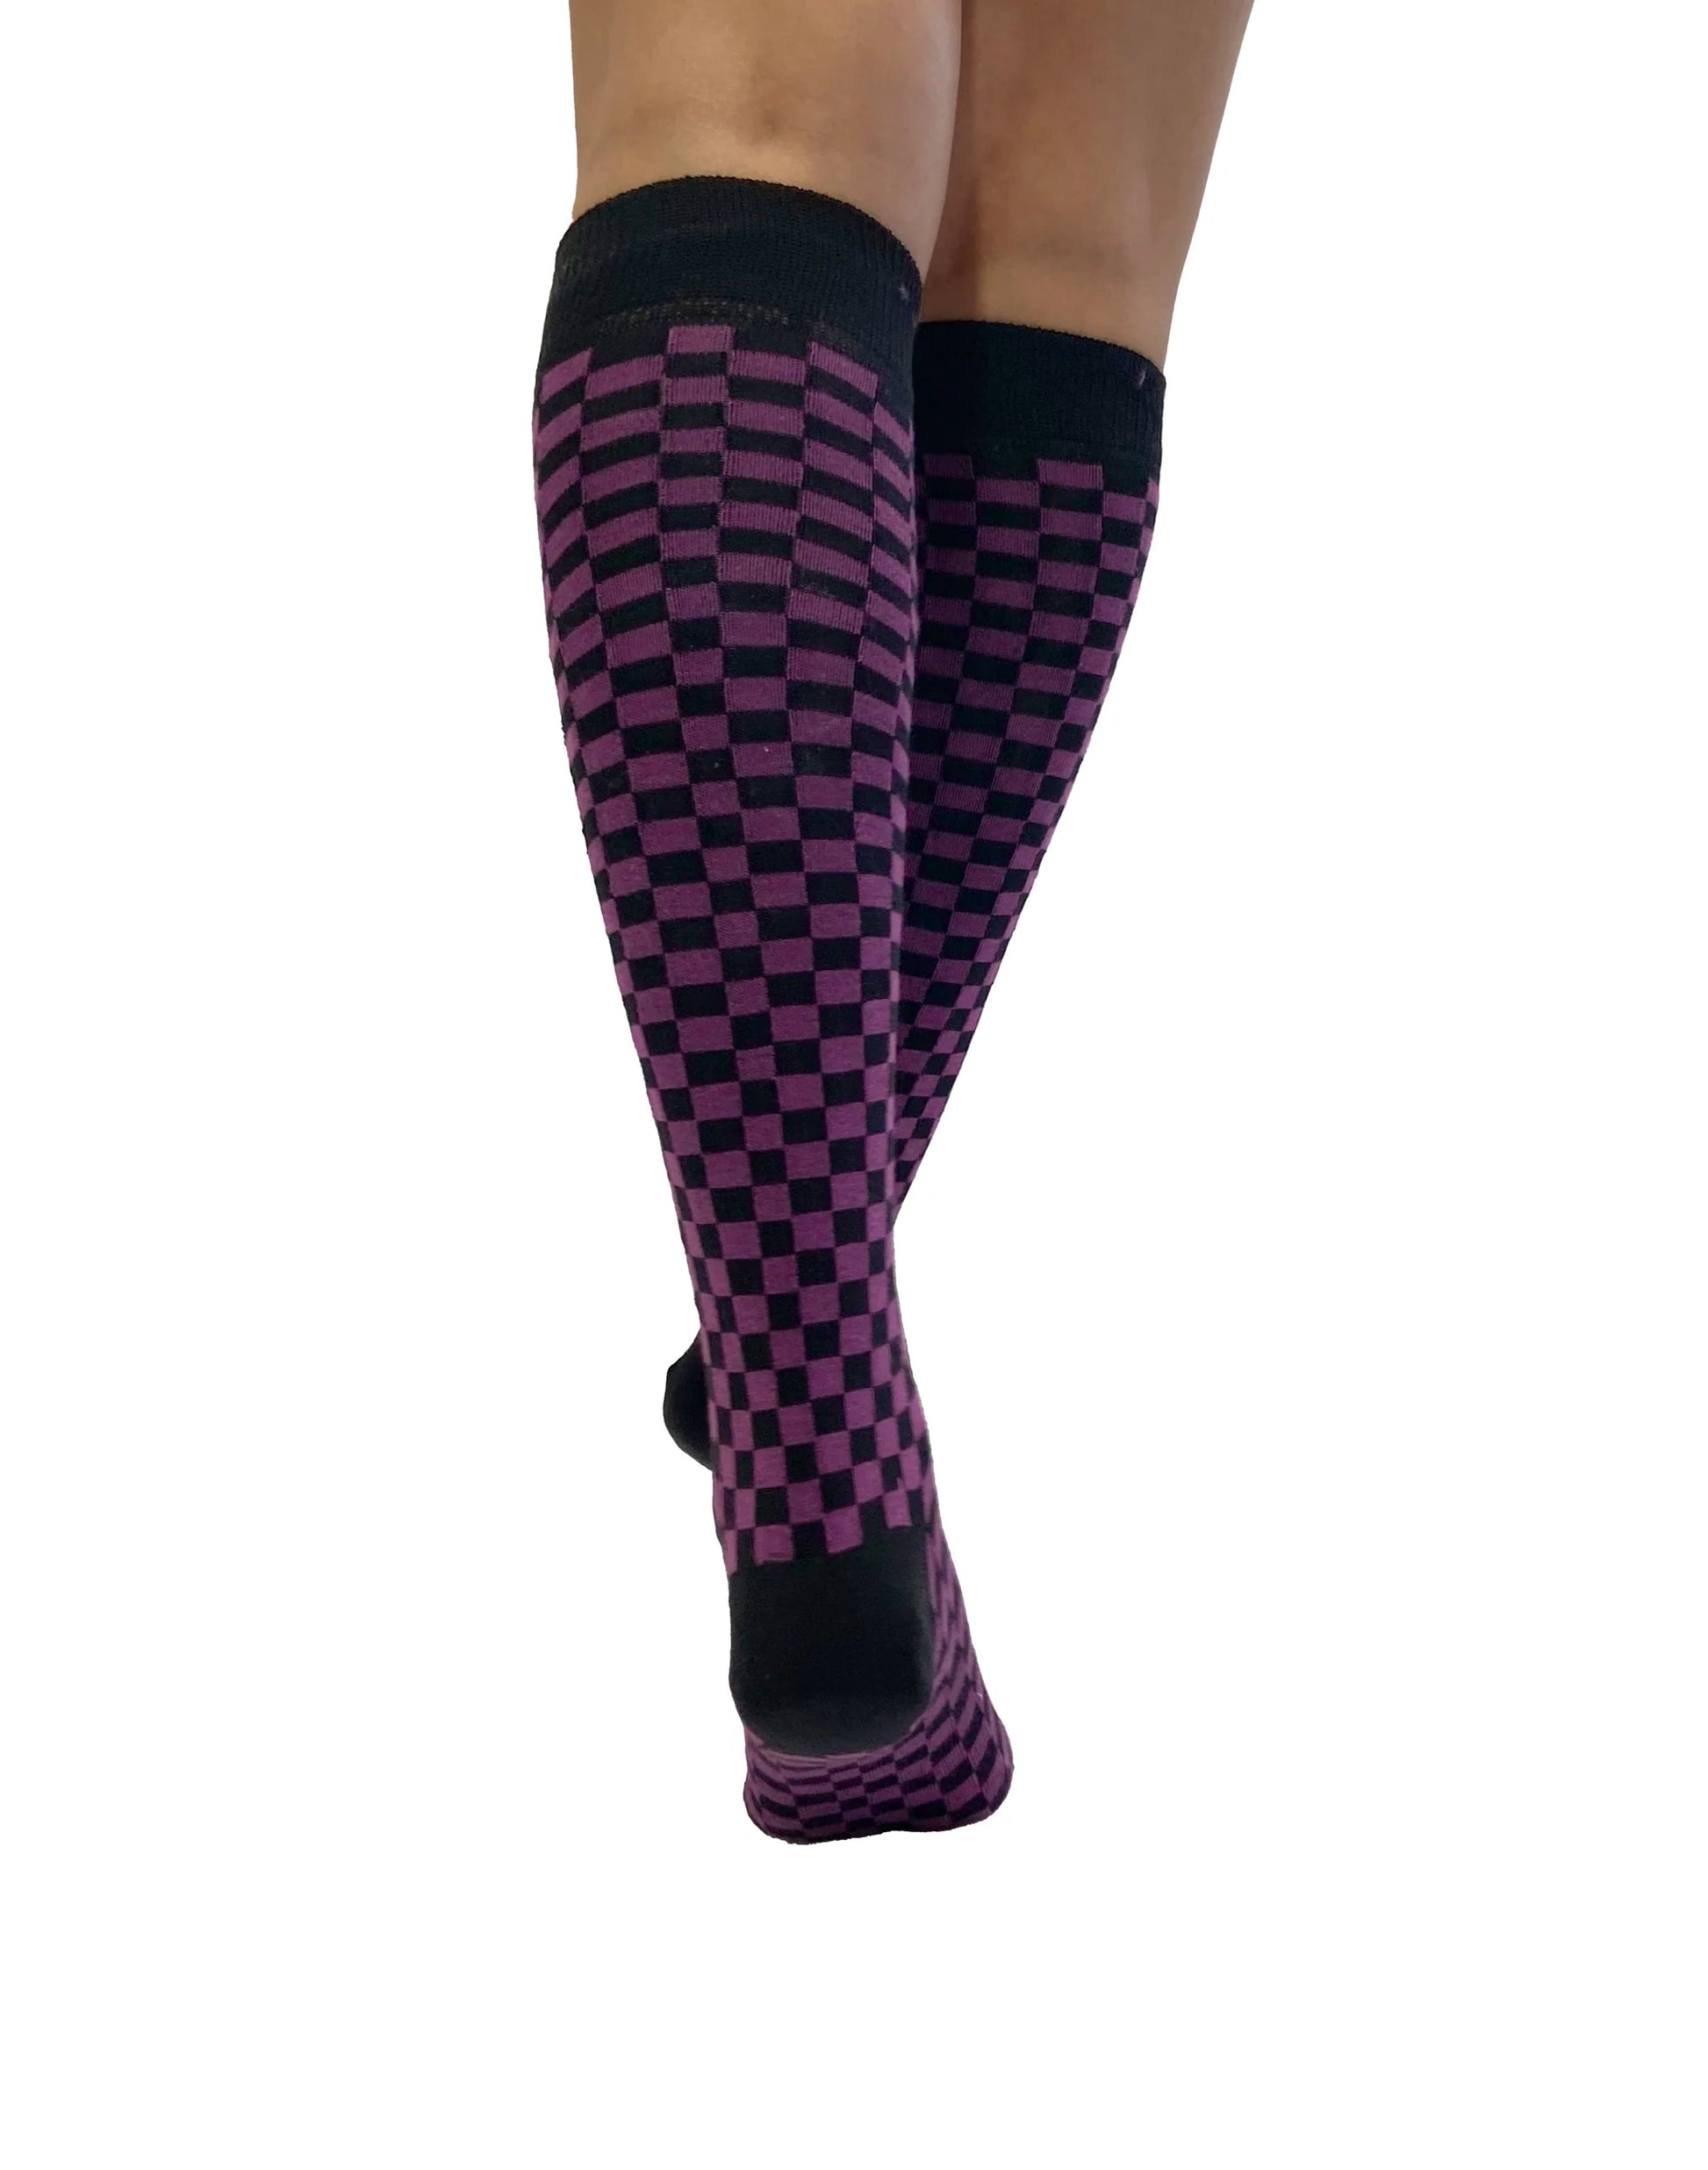 Pamela Mann Checkered Knee-Highs - Black and purple checkered square patterned knee-high cotton socks with black cuff, toe and heel.